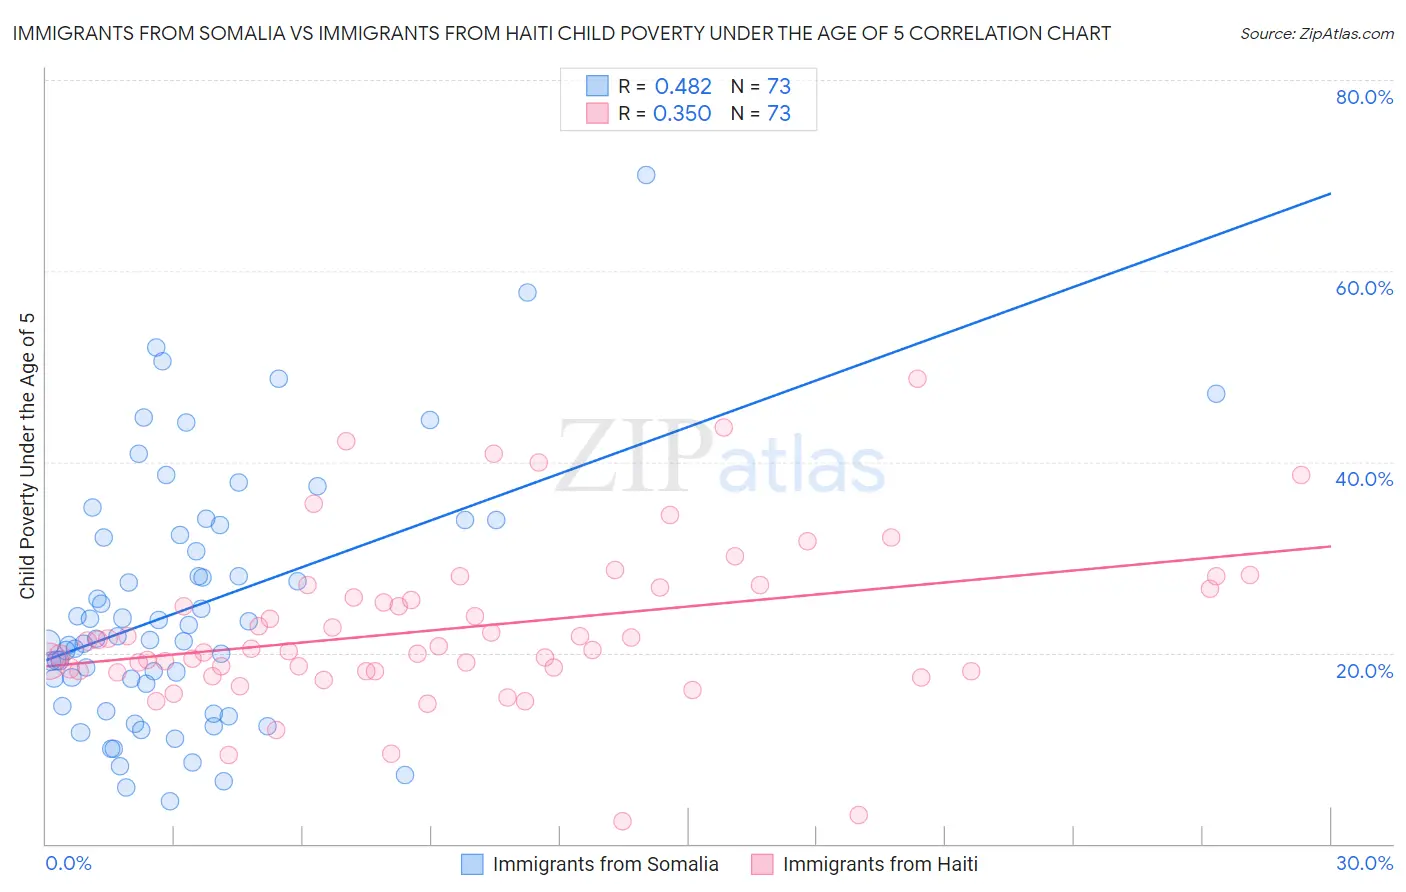 Immigrants from Somalia vs Immigrants from Haiti Child Poverty Under the Age of 5